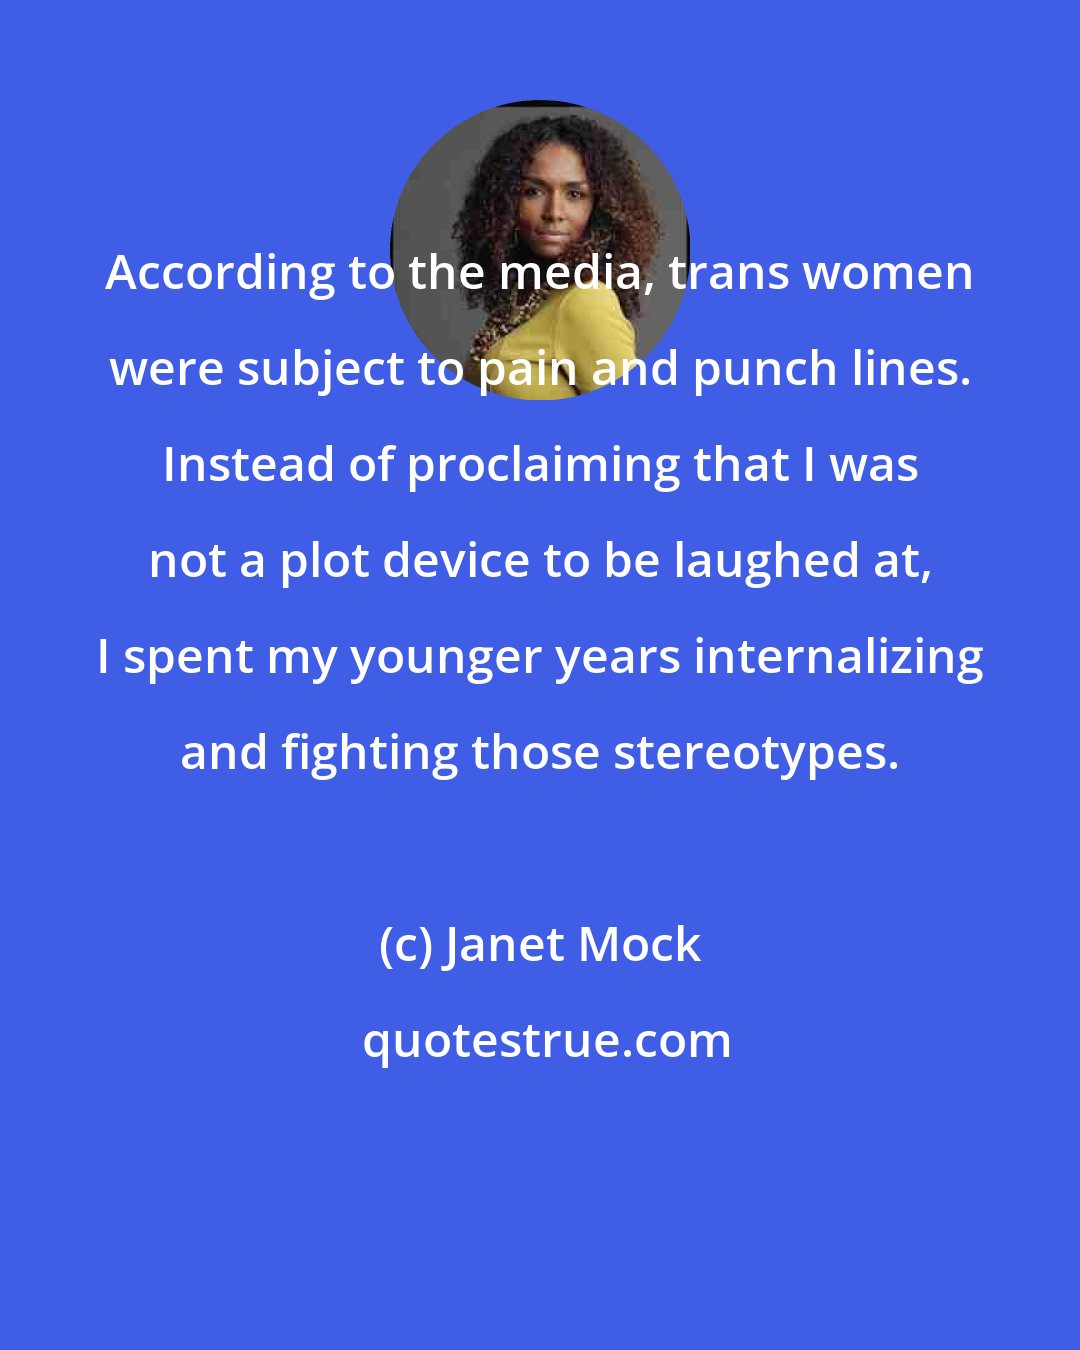 Janet Mock: According to the media, trans women were subject to pain and punch lines. Instead of proclaiming that I was not a plot device to be laughed at, I spent my younger years internalizing and fighting those stereotypes.